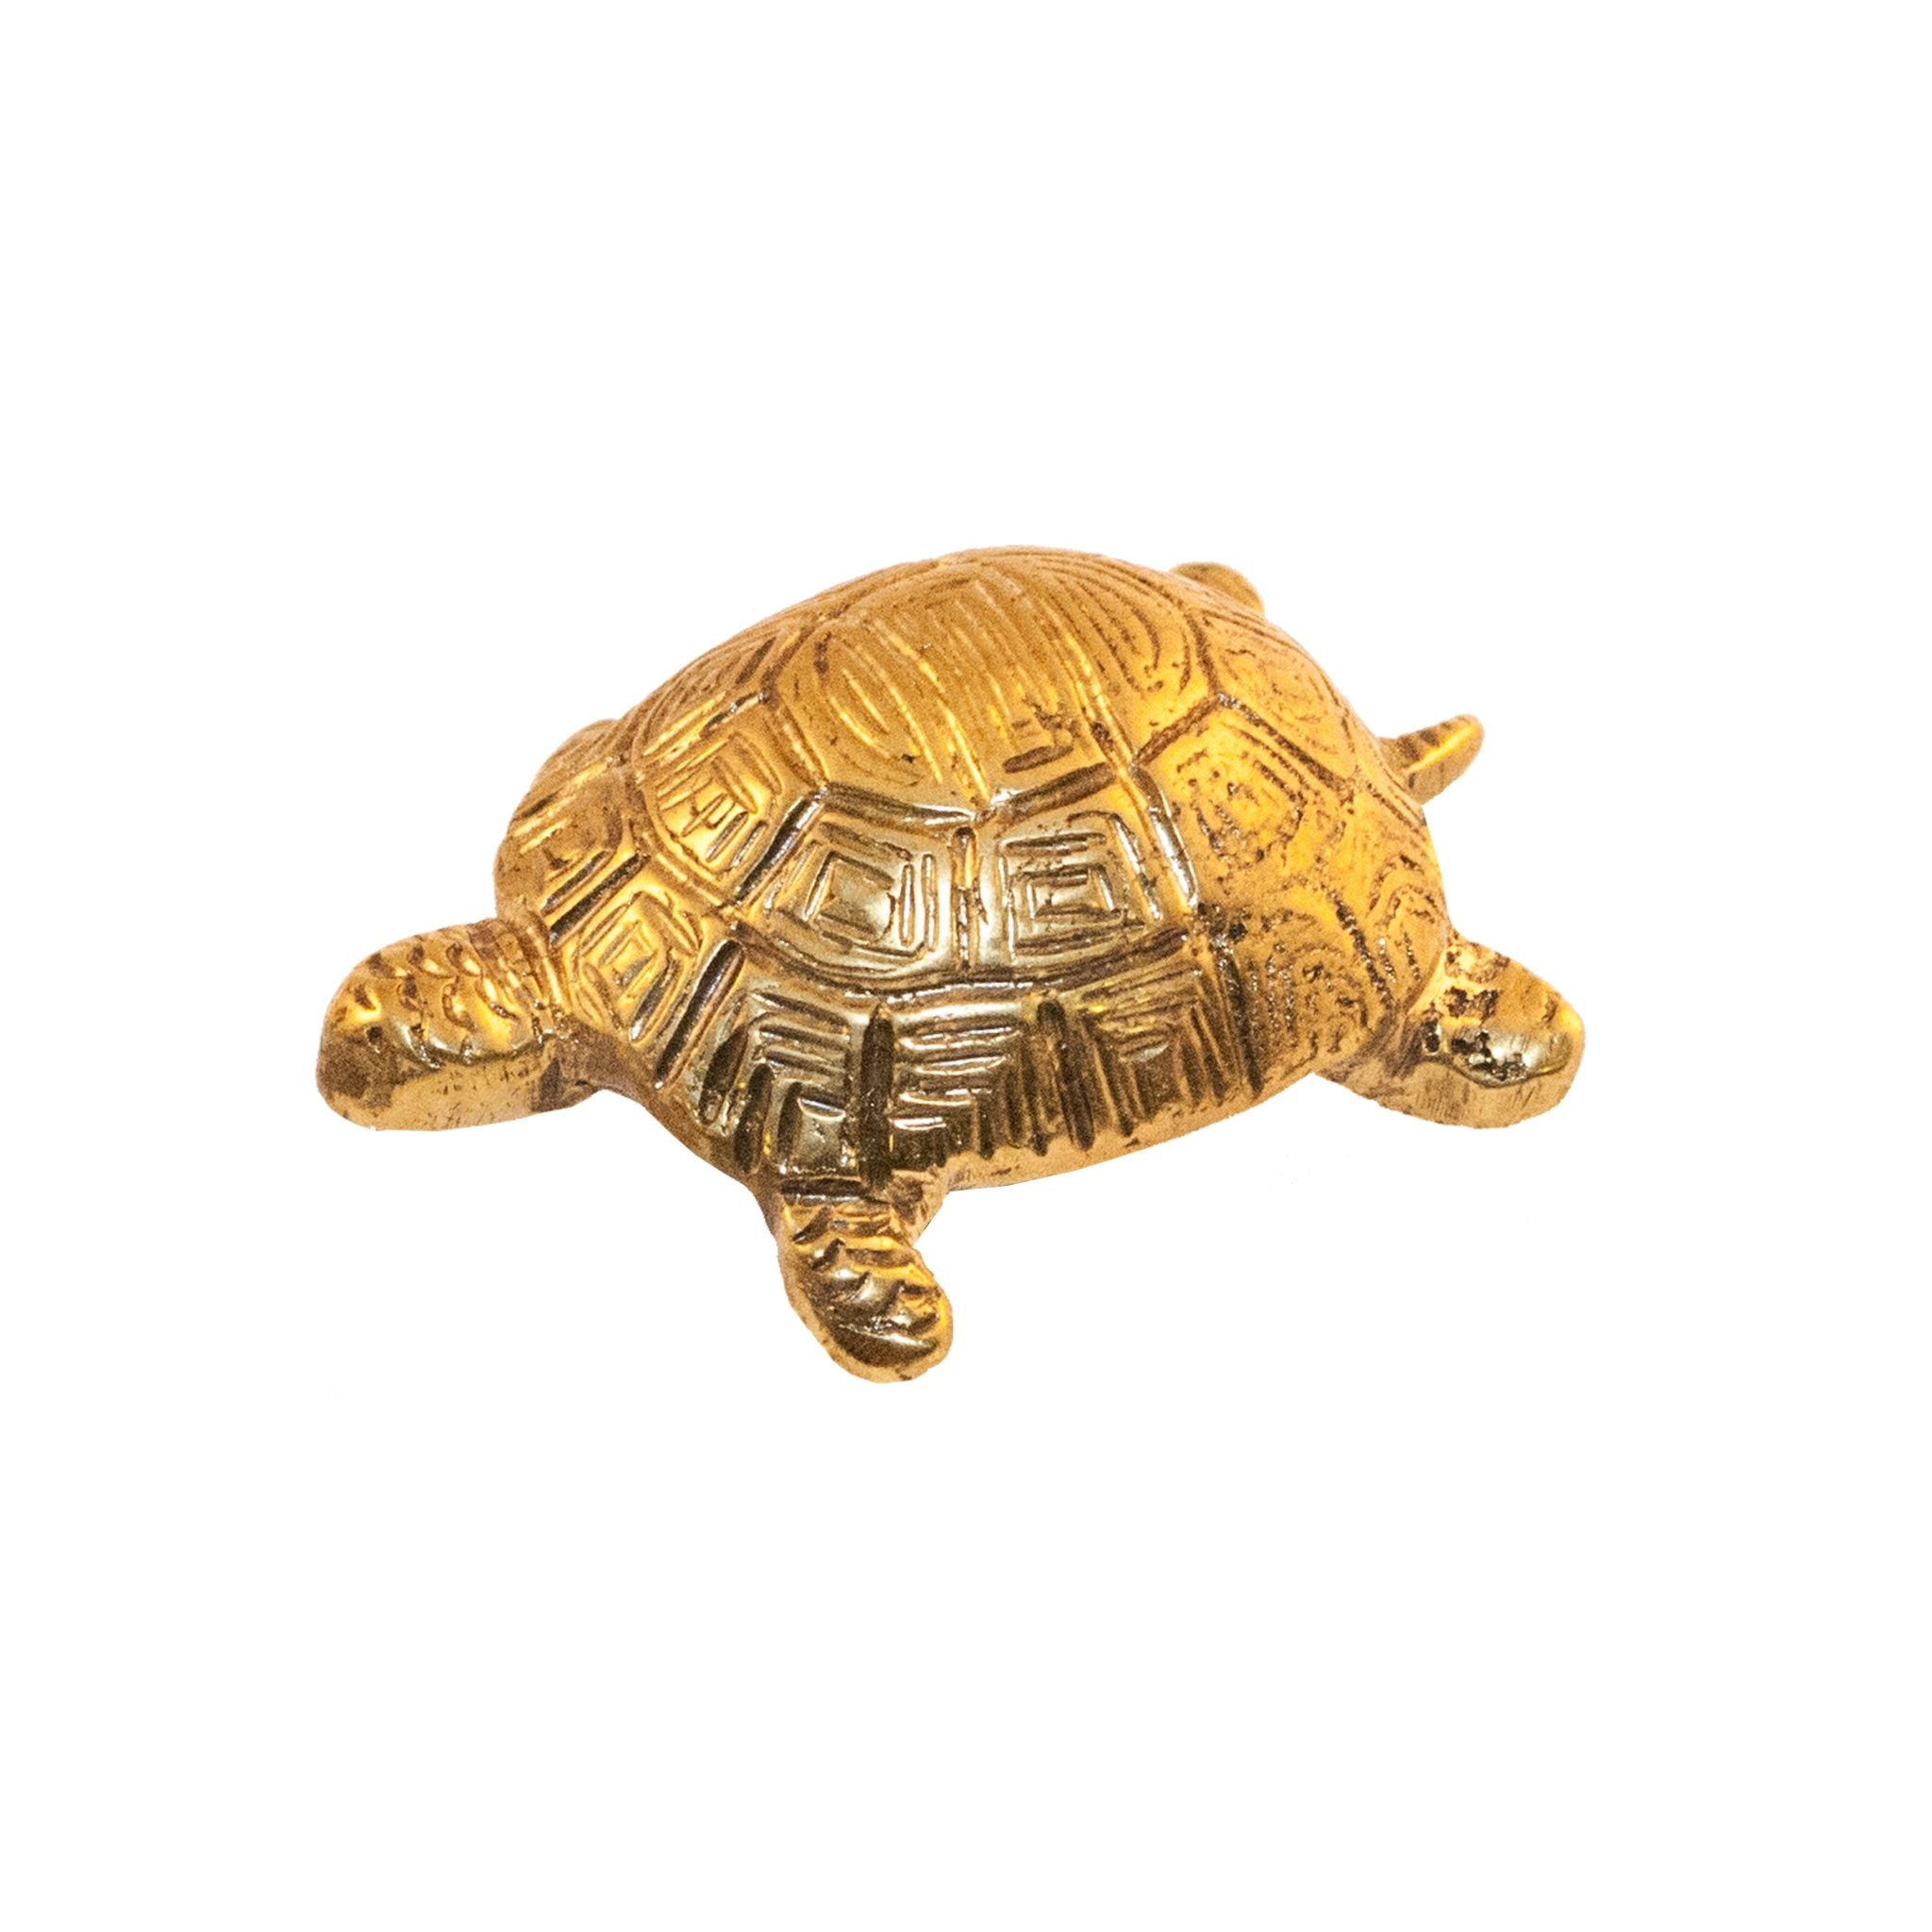 An image of a small brass turtle-shaped knob against a neutral background. The knob is intricately designed with attention to detail, showcasing the turtle's shell and features. Perfect for adding a touch of charm and personality to cabinets or drawers.